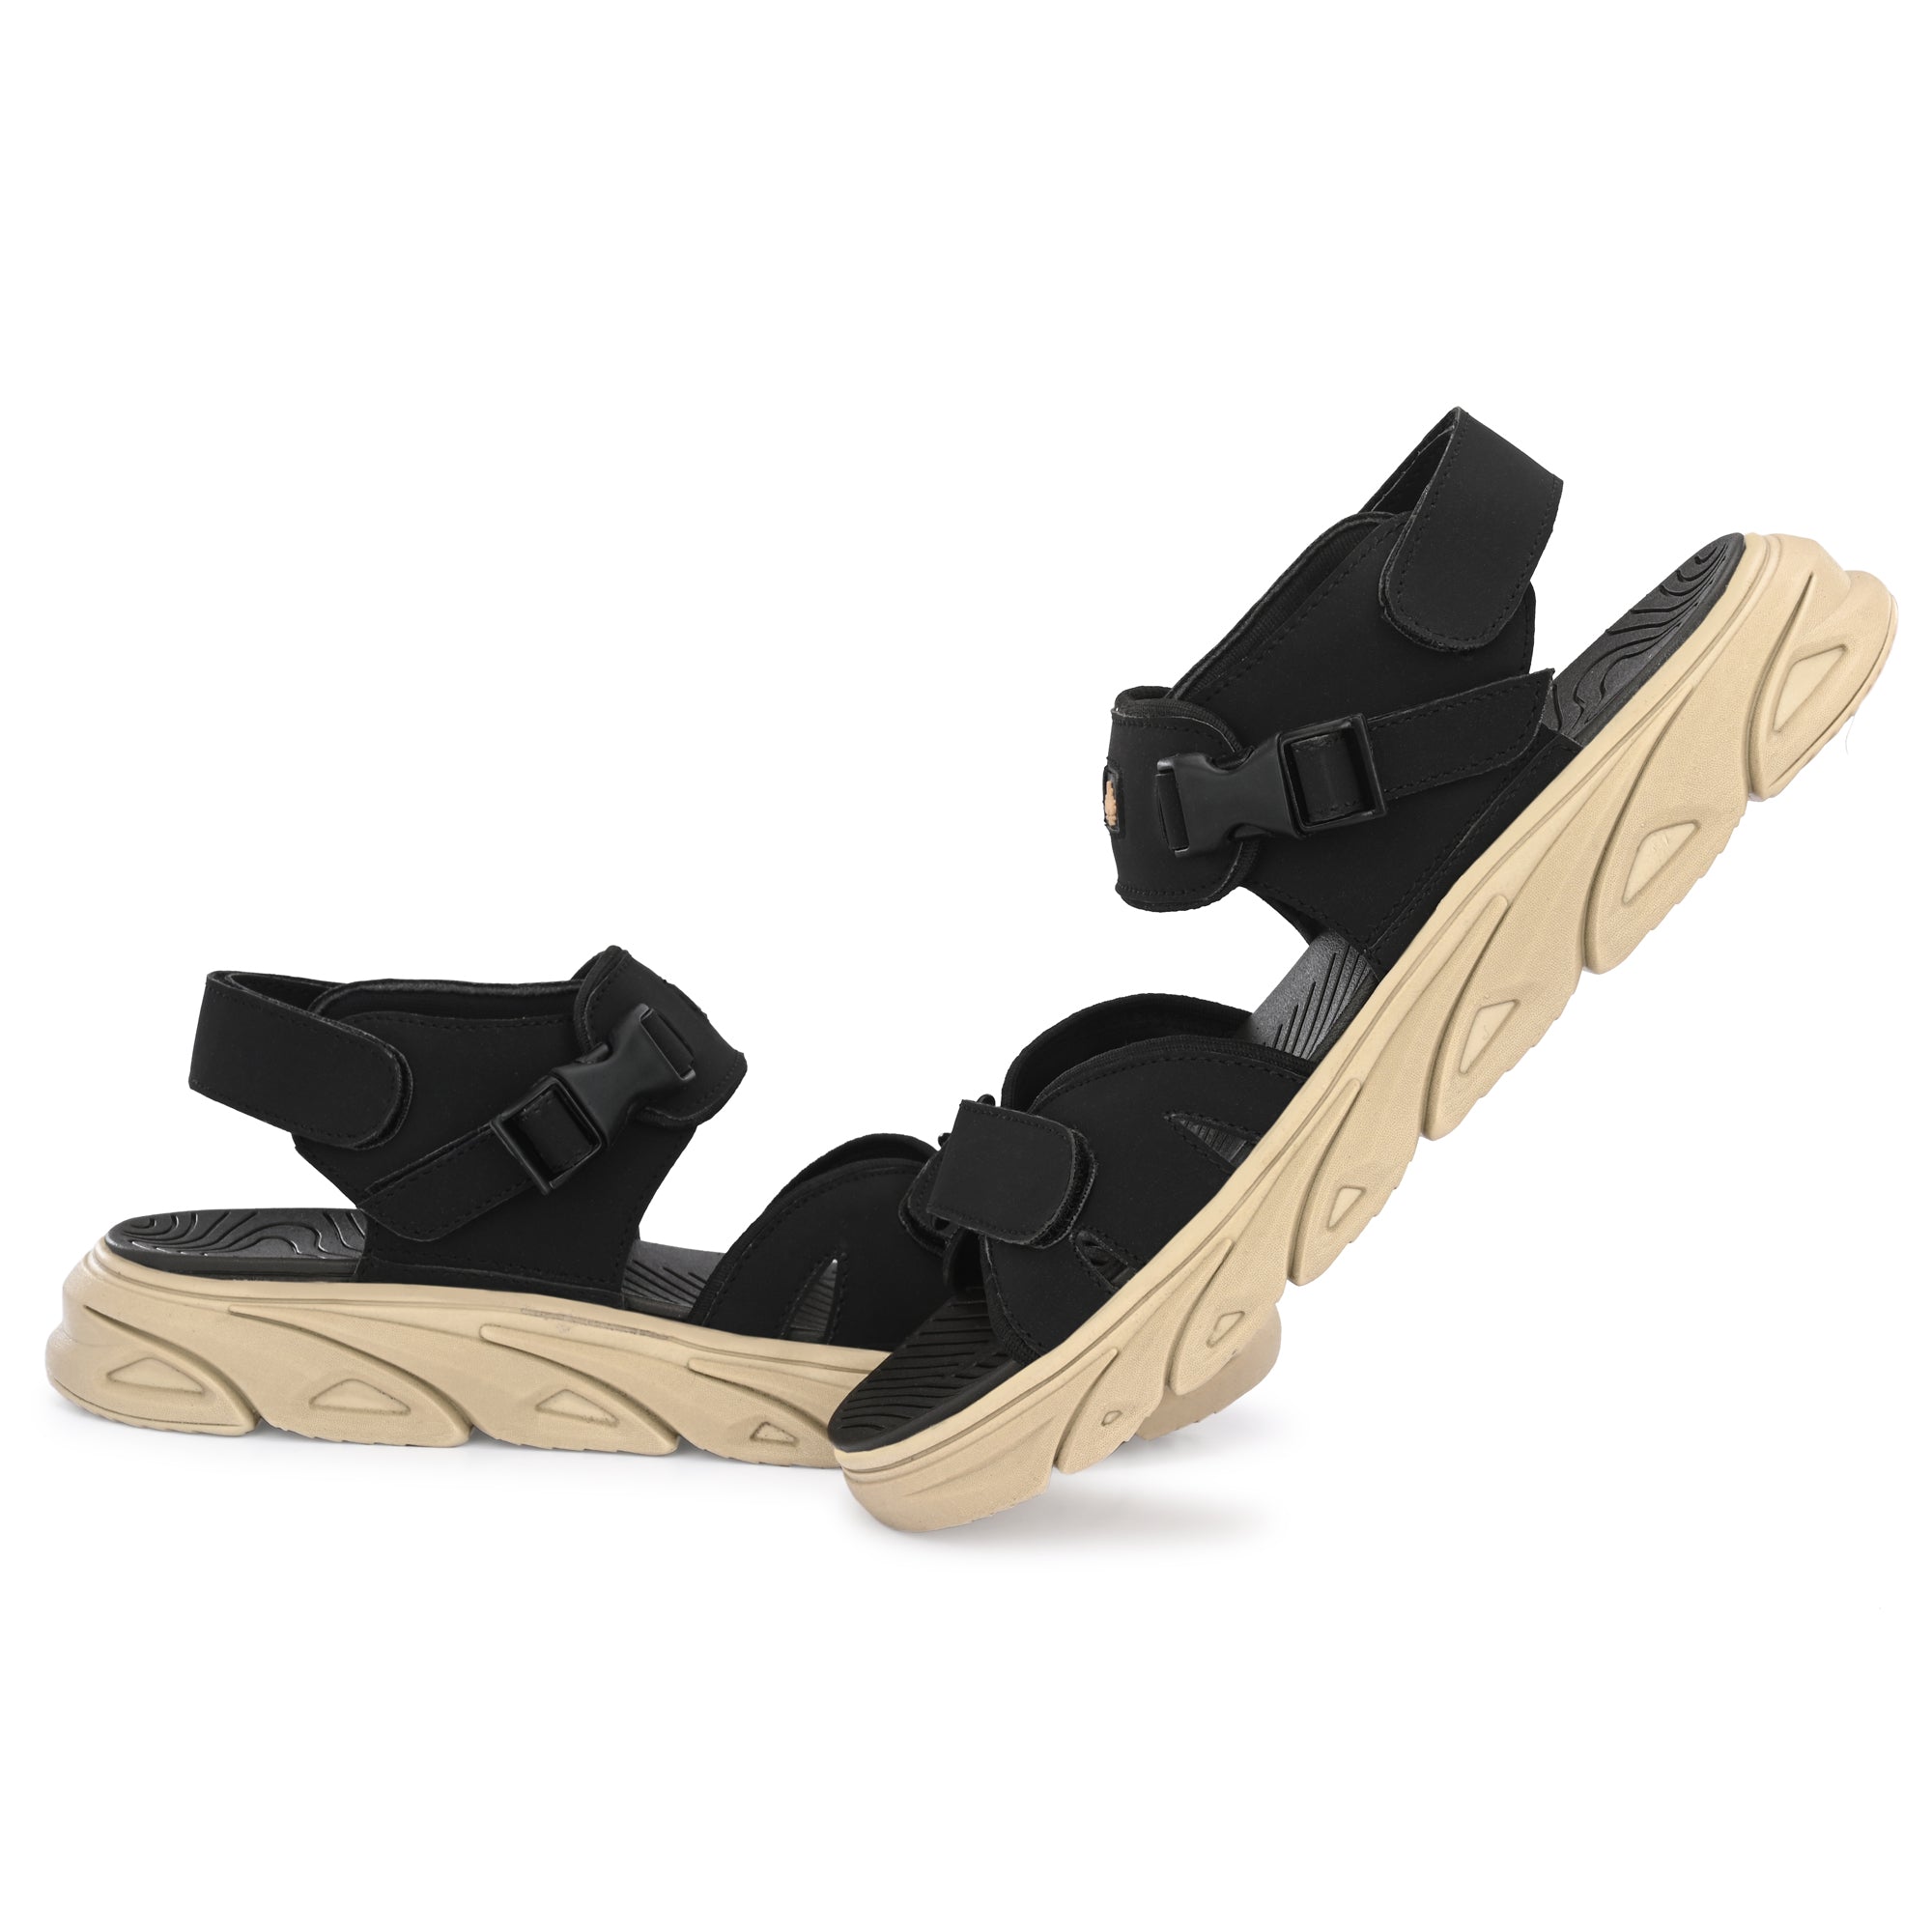 MOCHI-Black Casual Sandals 36 in Meerut at best price by Pinki Footwear -  Justdial